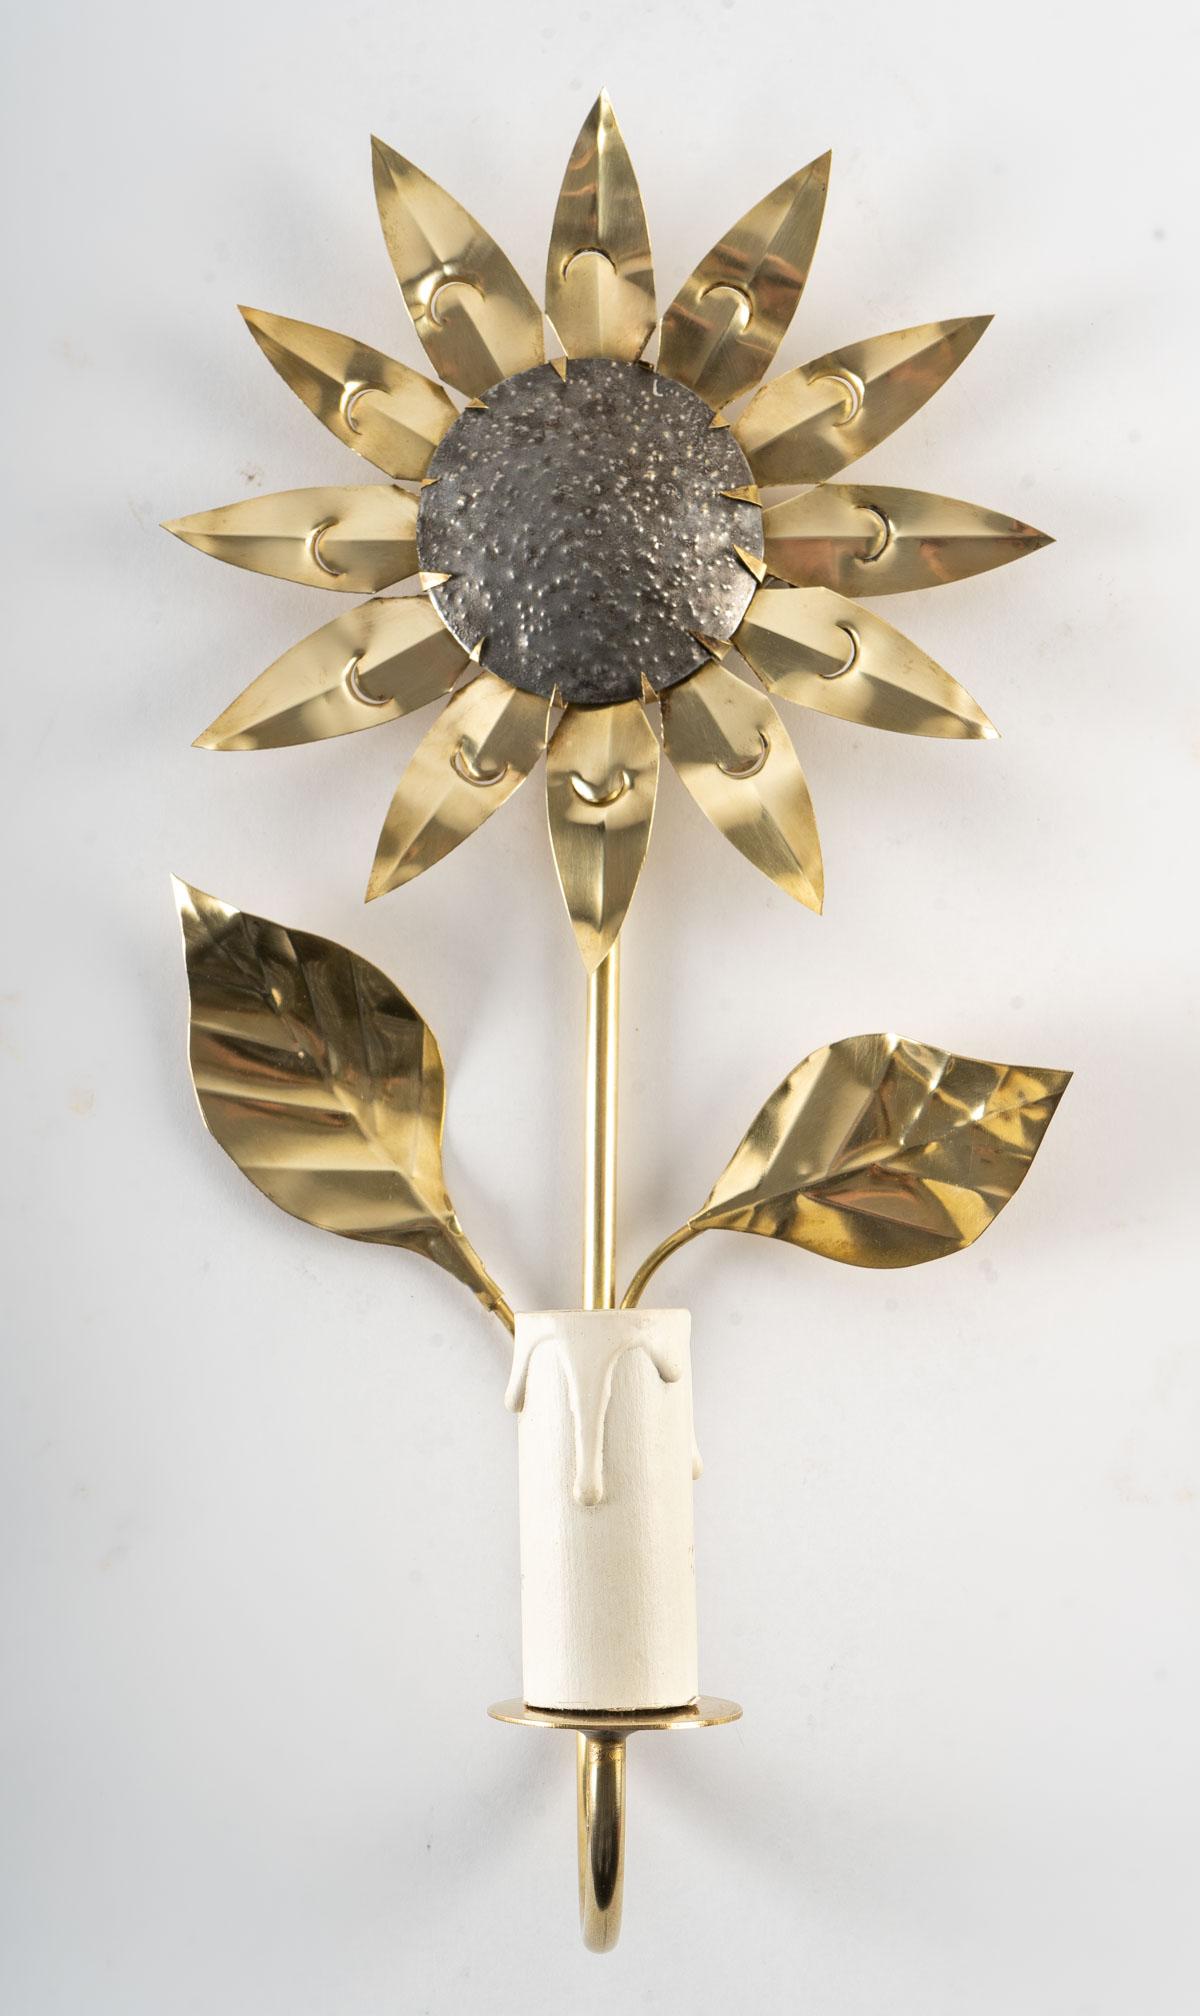 
Composed of a thin gilded brass stem decorated on the upper part with a sunflower, the petals are in gilded brass.
On the lower part, the stem rises towards the front of the sconce, it is underlined by two golden brass leaves.
It is dressed with a